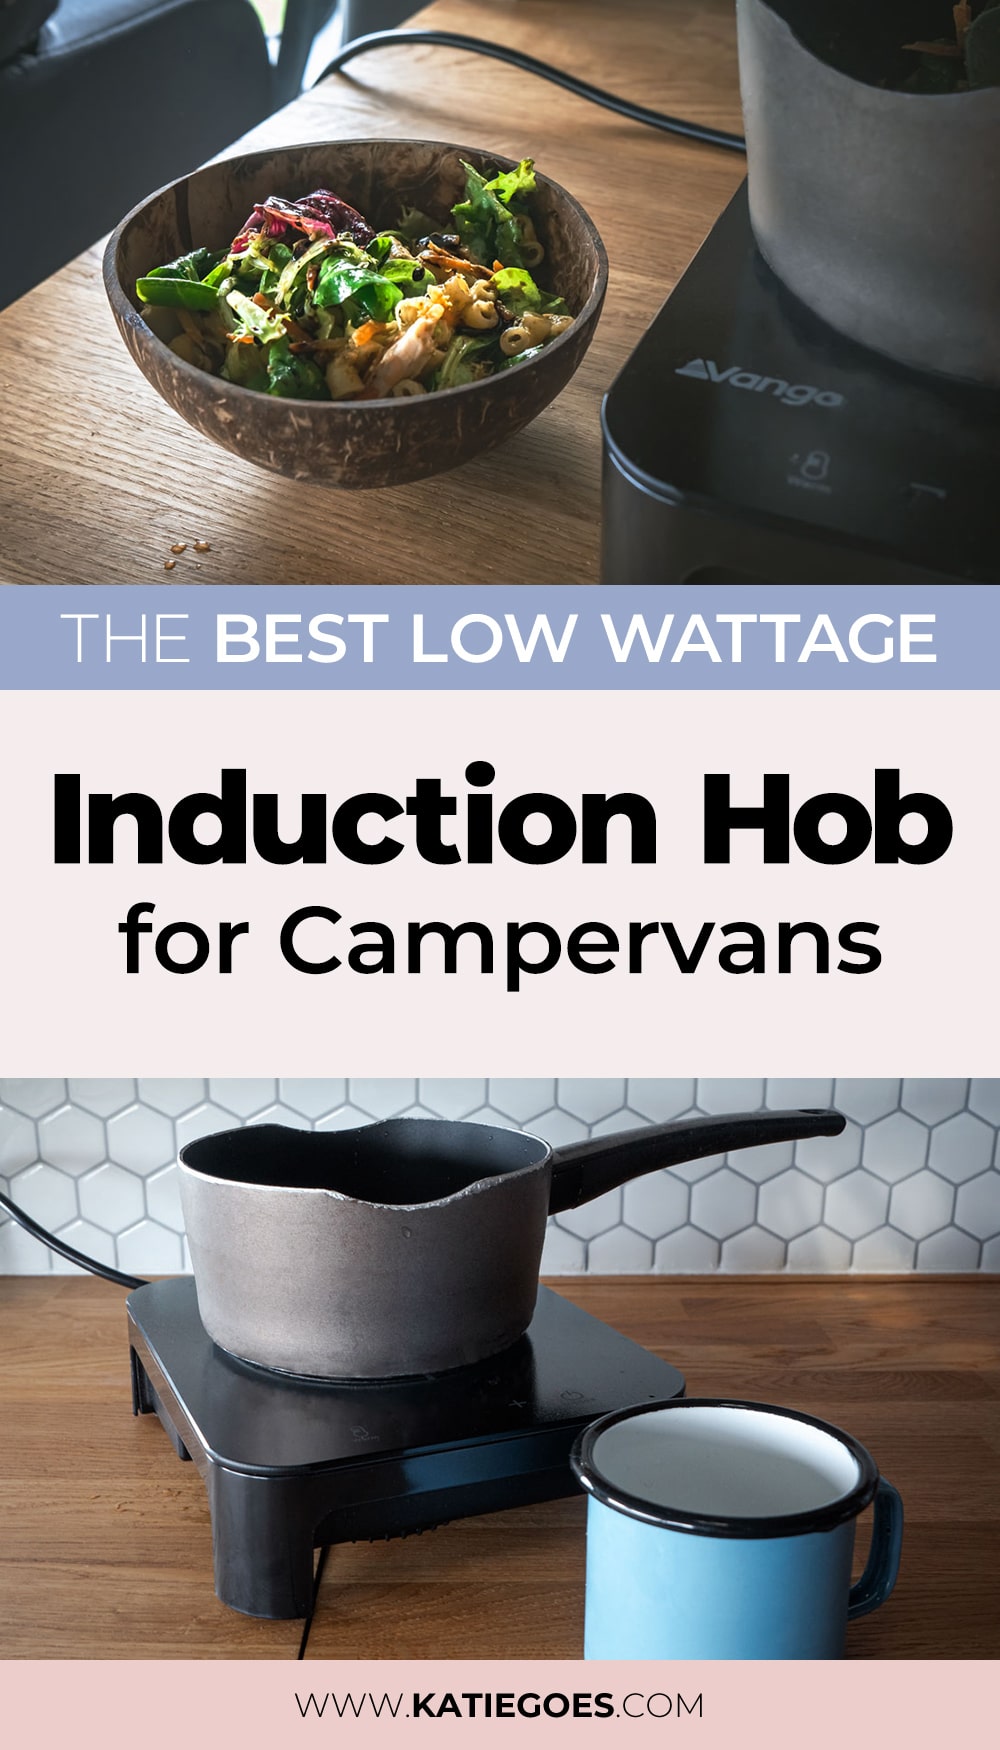 Induction Hob for Campervans: The Best Low Wattage Induction Hob